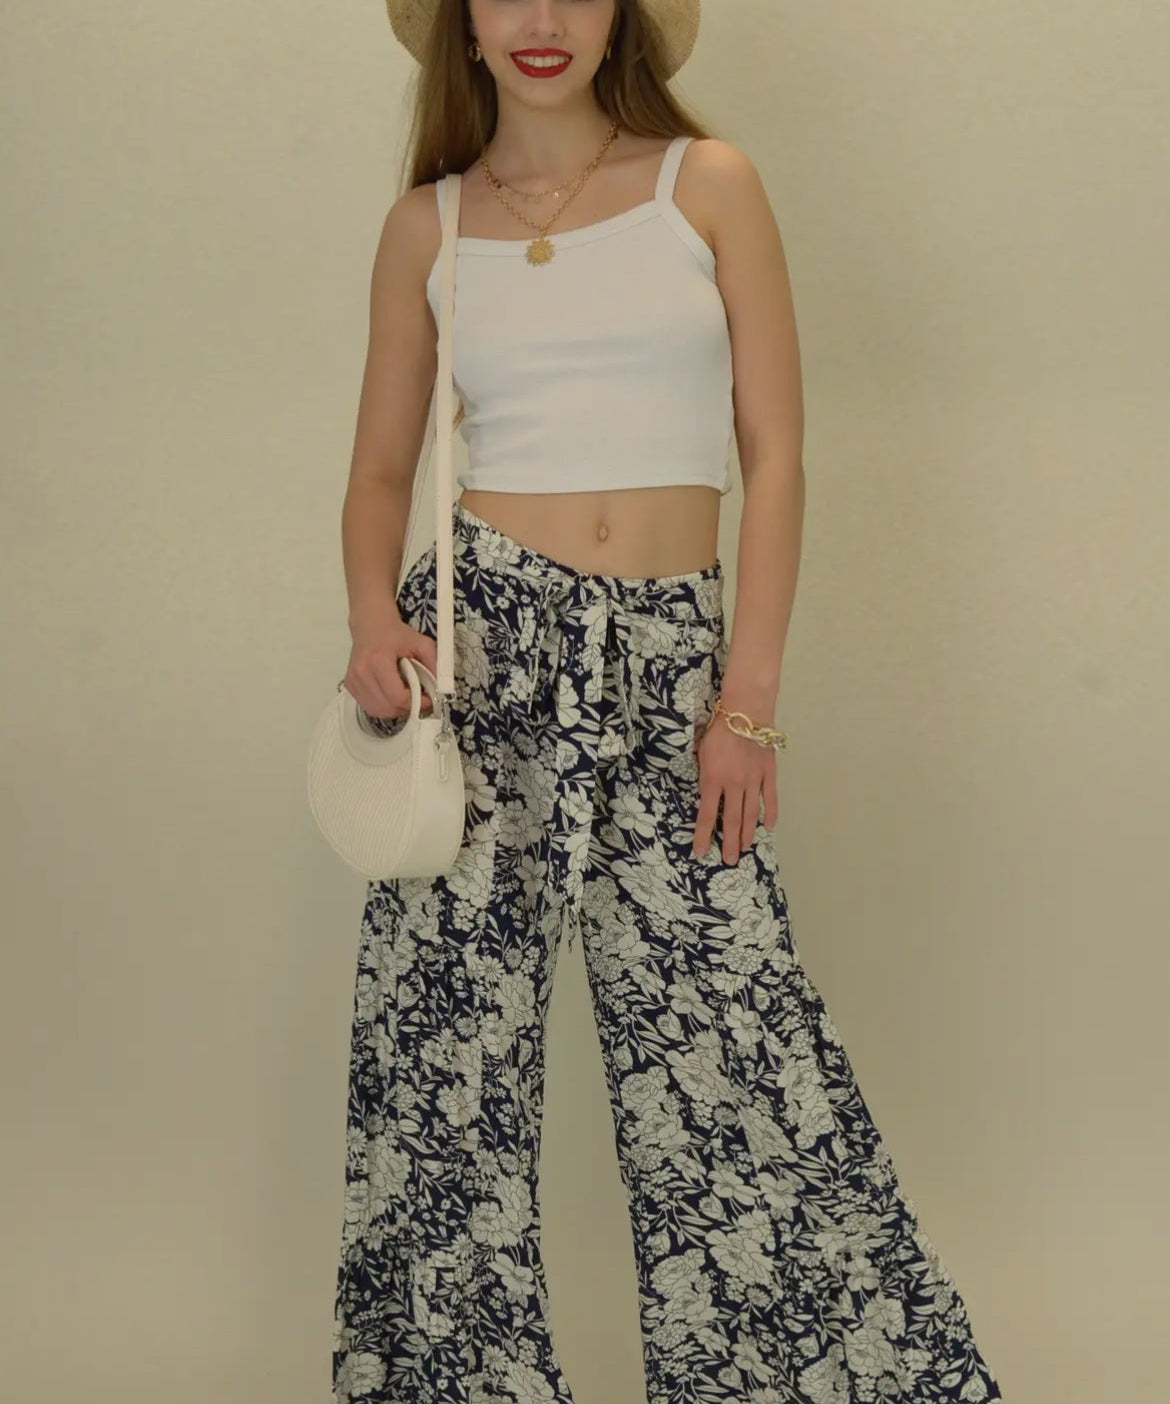 High waisted floral flared pants - Blue Sky Fashions & Lingerie